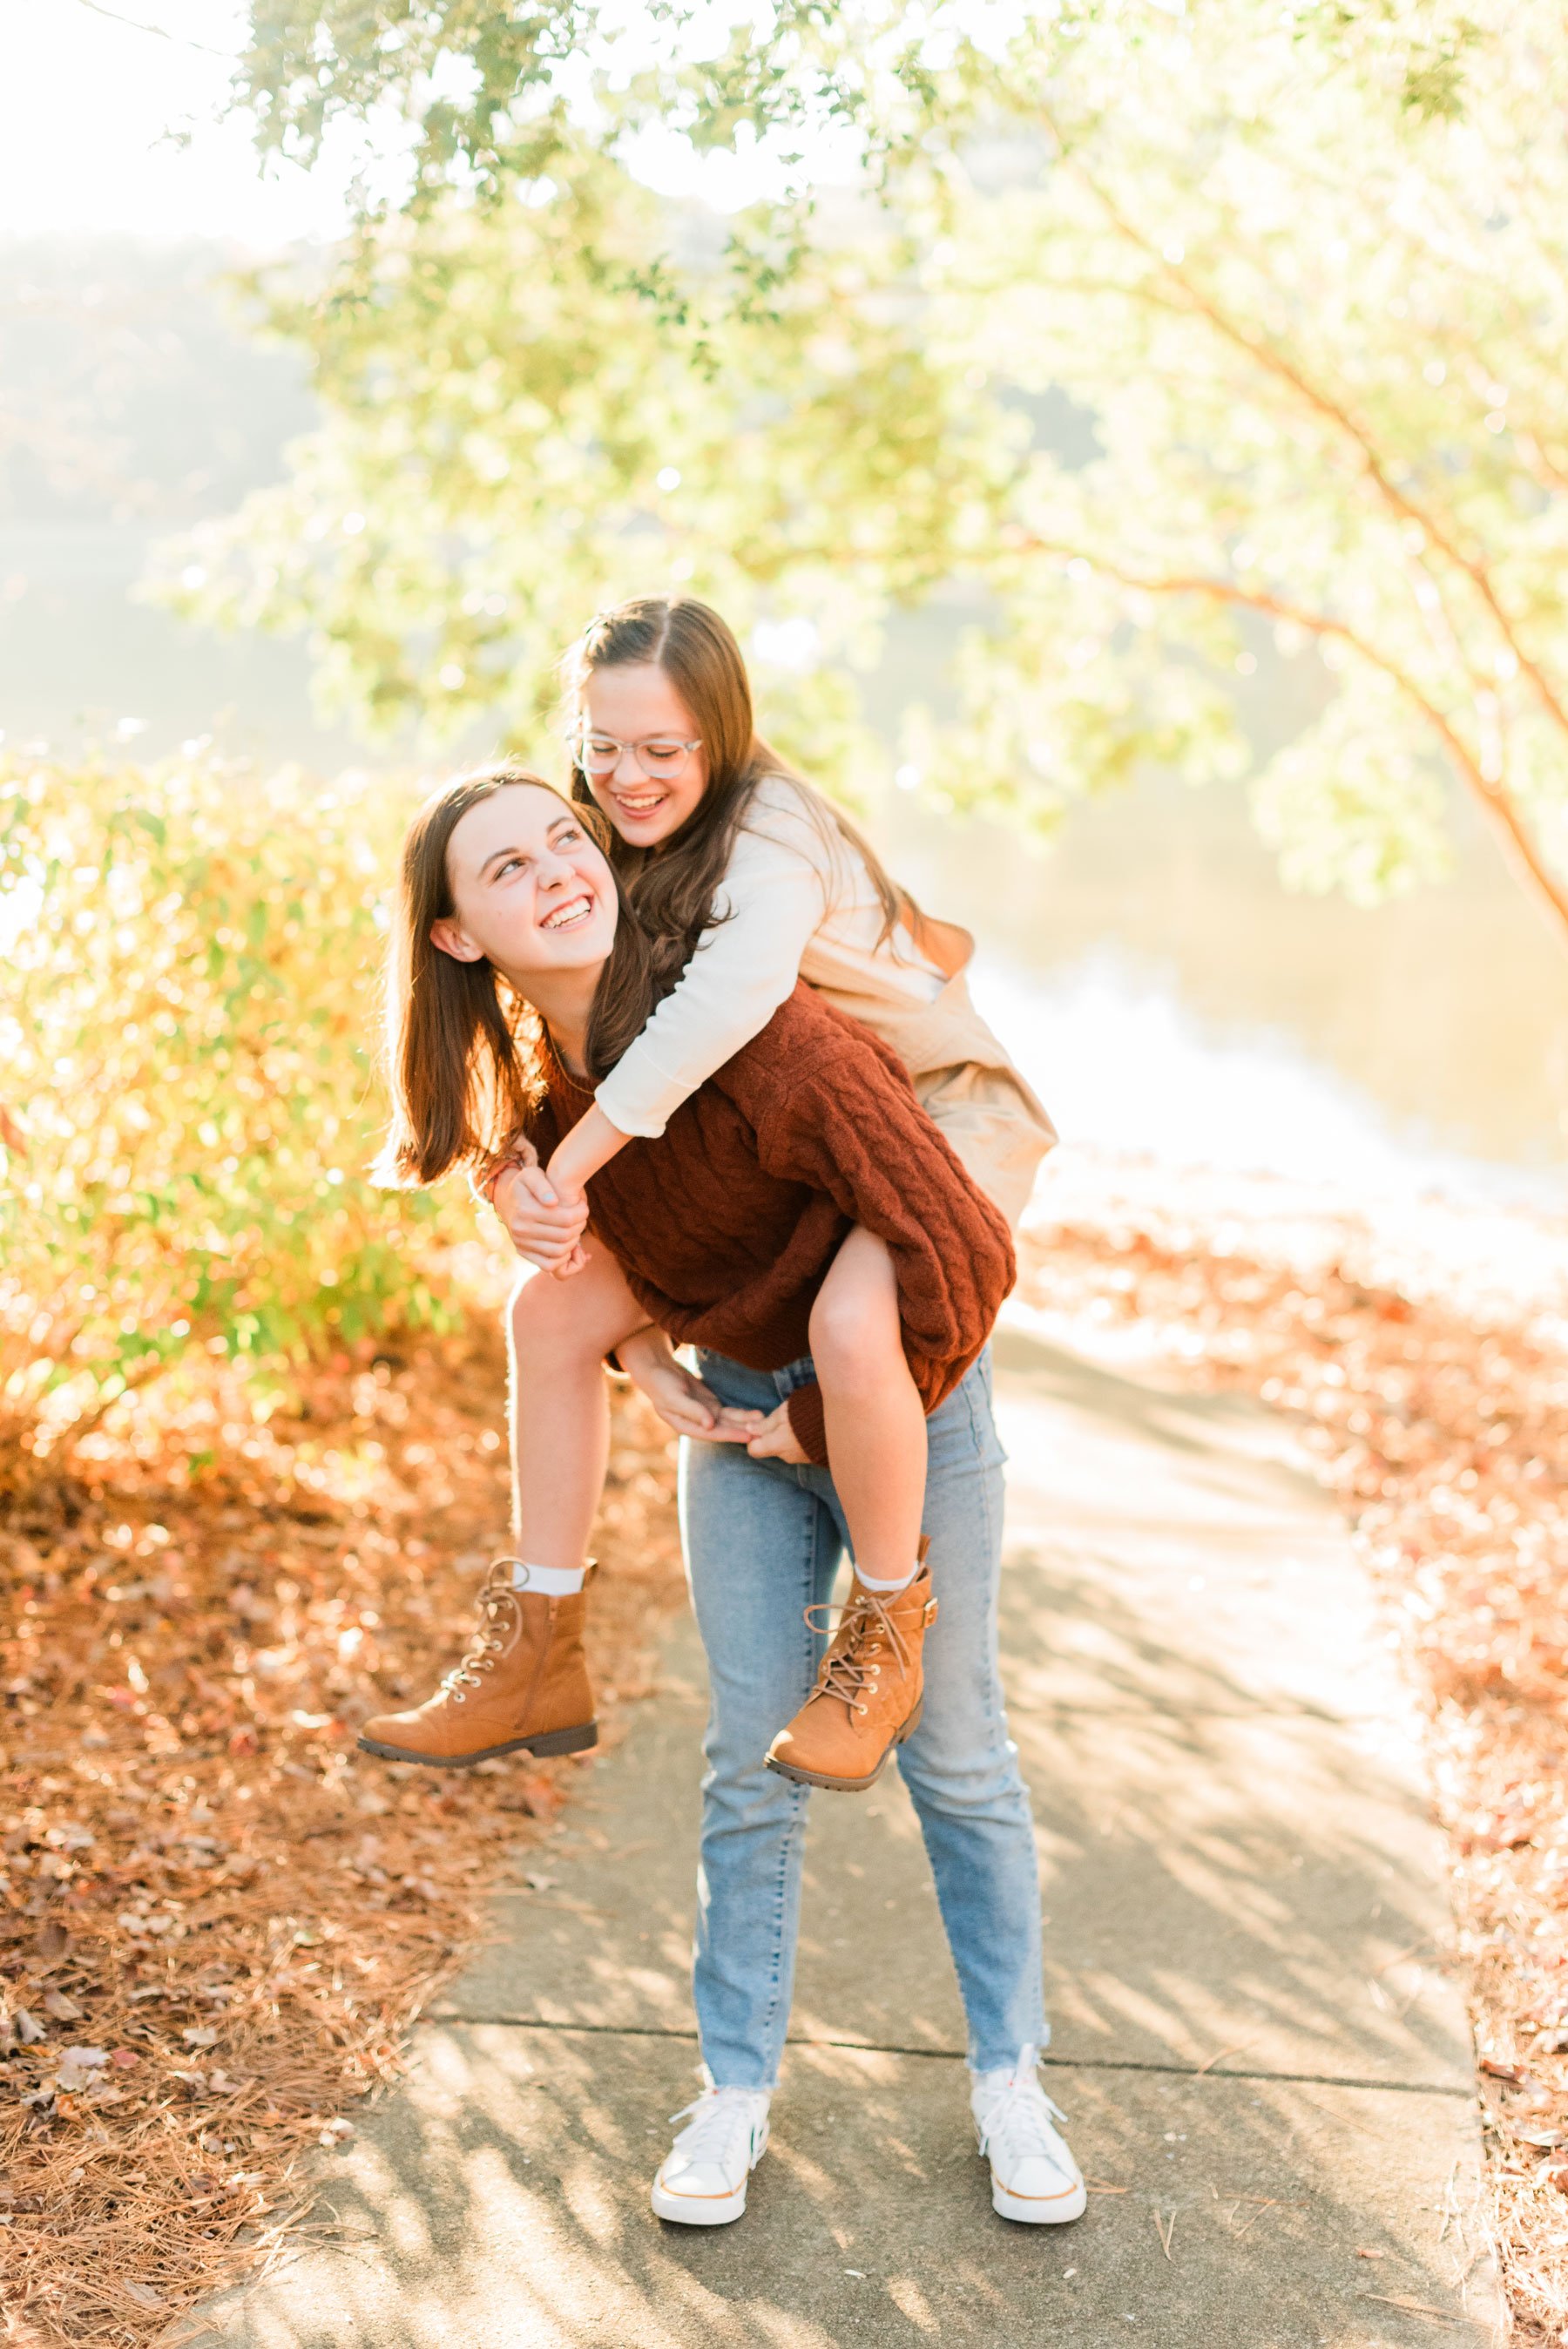  When children see themselves in photos with their mom, it's a tangible reminder of her presence in their lives. Jacquie Erickson Photography is a great choice to help you capture images with your children. #JacquieEricksonPhotography #MoreThanProofO